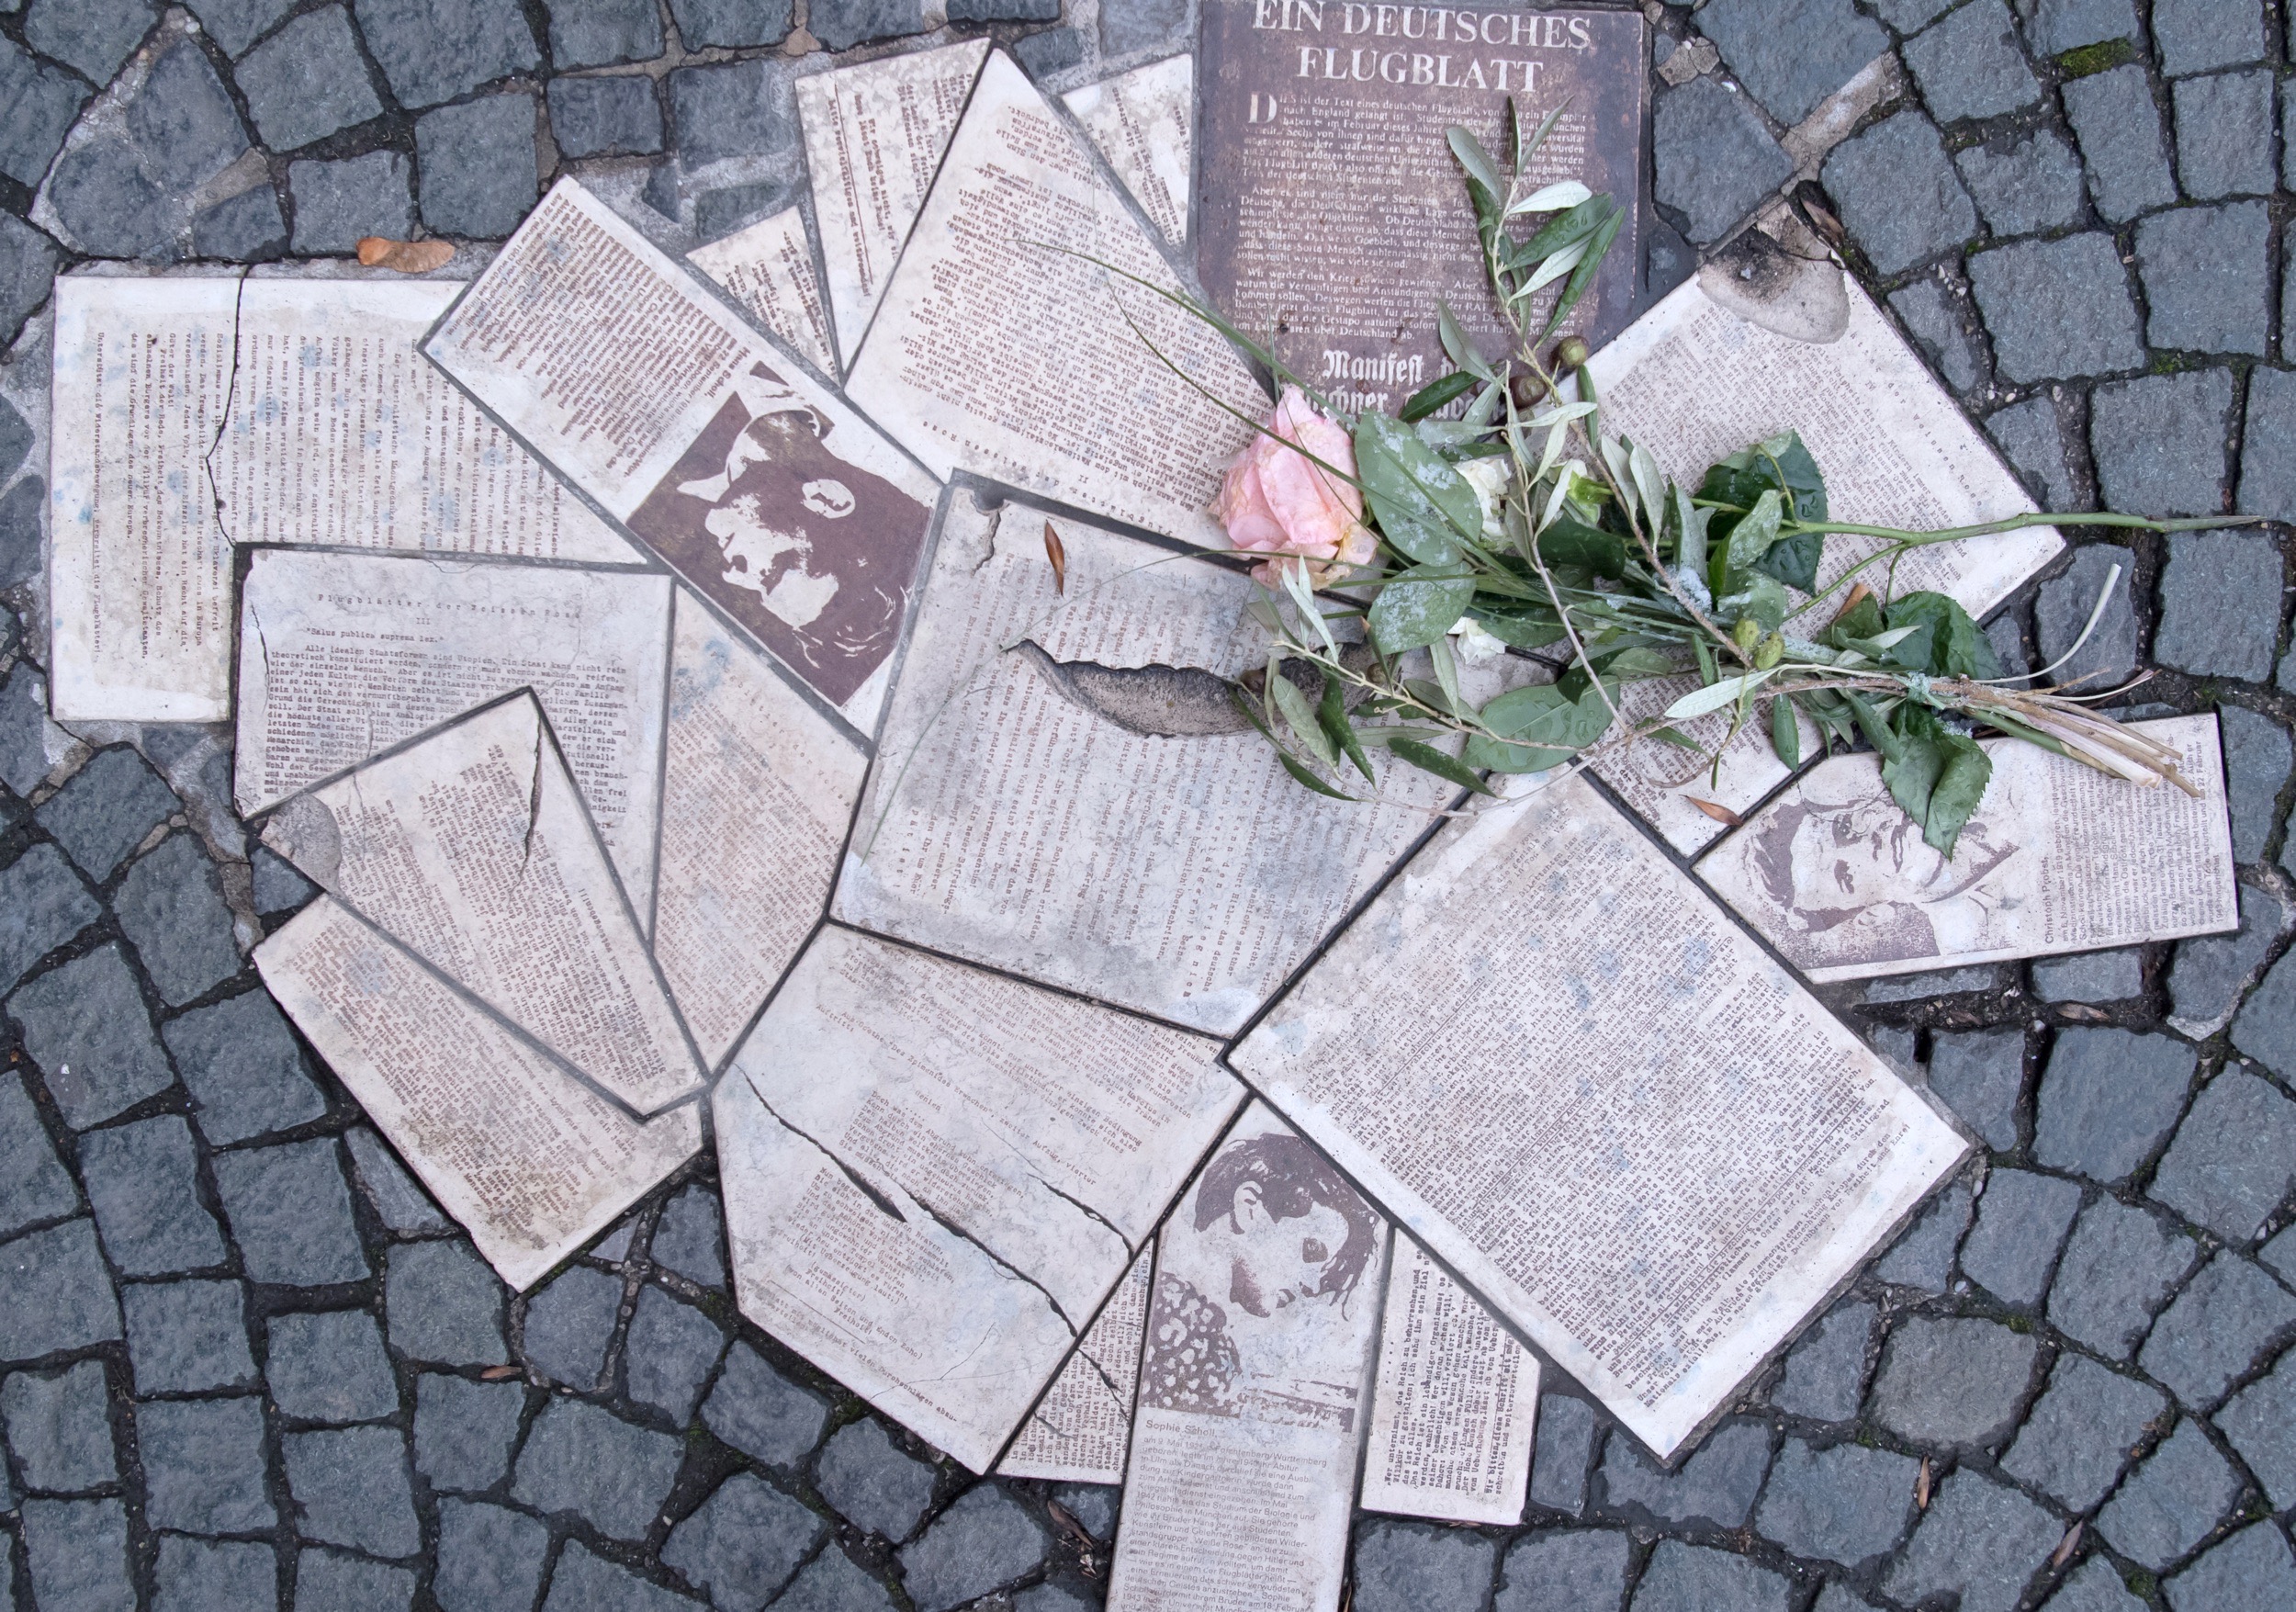 In front of the entrance to the main building of the Ludwig-Maximilians-Universit√§t (LMU) at Geschwister-Scholl-Platz the leaflets of the resistance group "White Rose" are embedded in the ground as a monument in 2018. (Photo by Sven Hoppe/picture alliance via Getty Images)